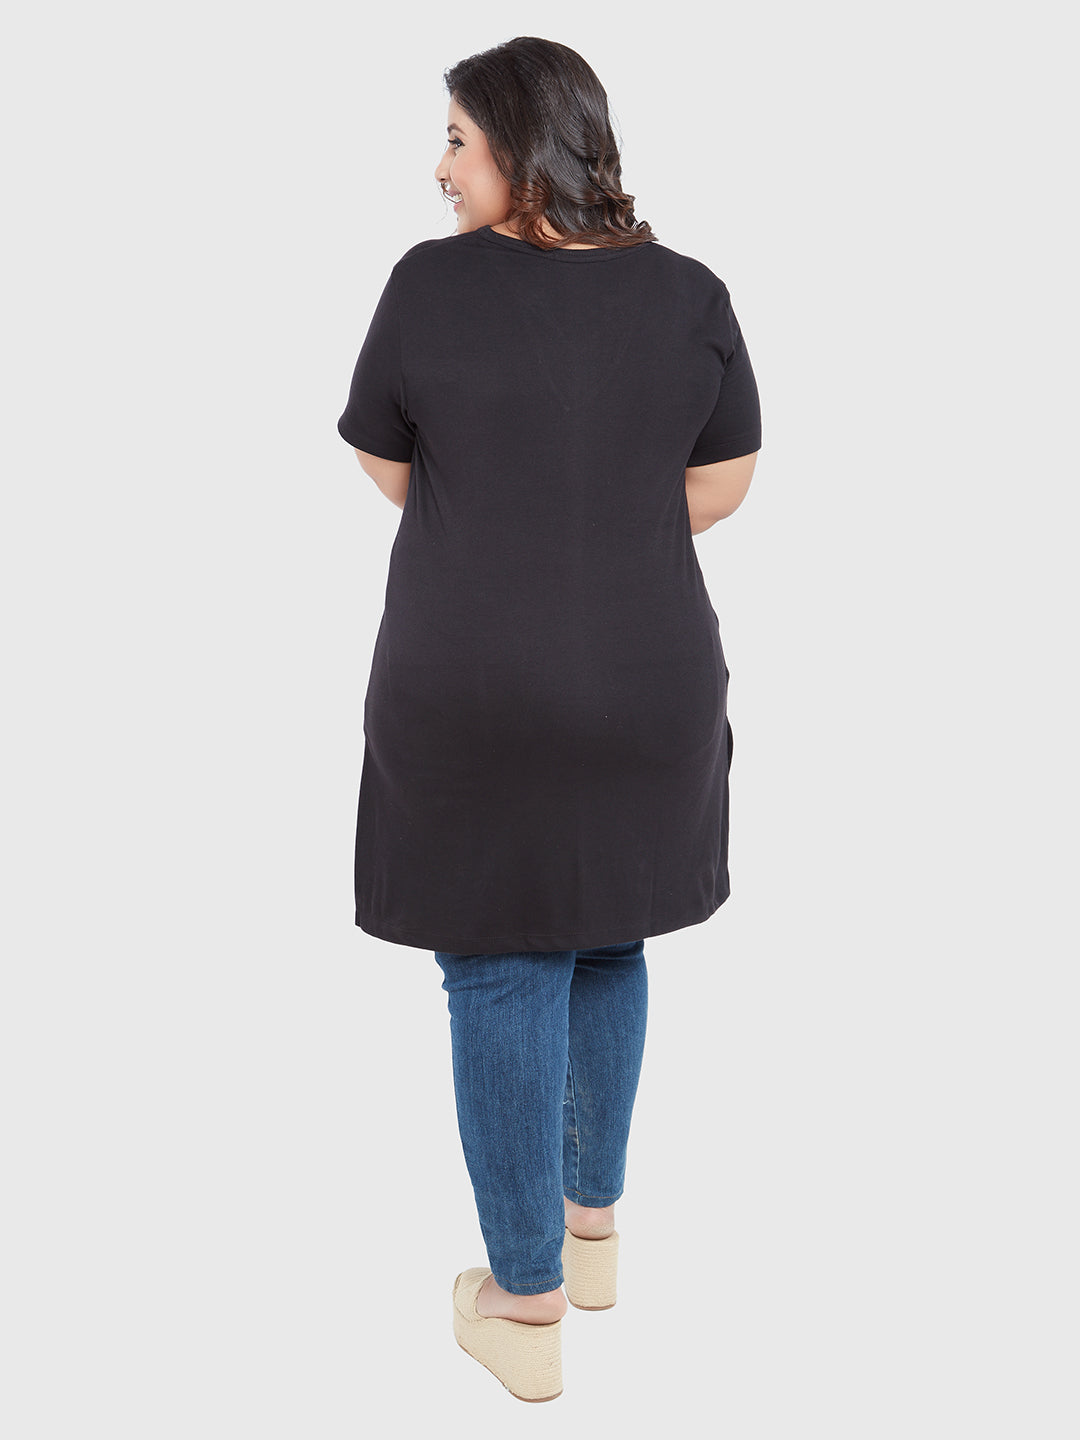 Stylish Grey Cotton Plus Size Half Sleeves Long Top For Women Online In India